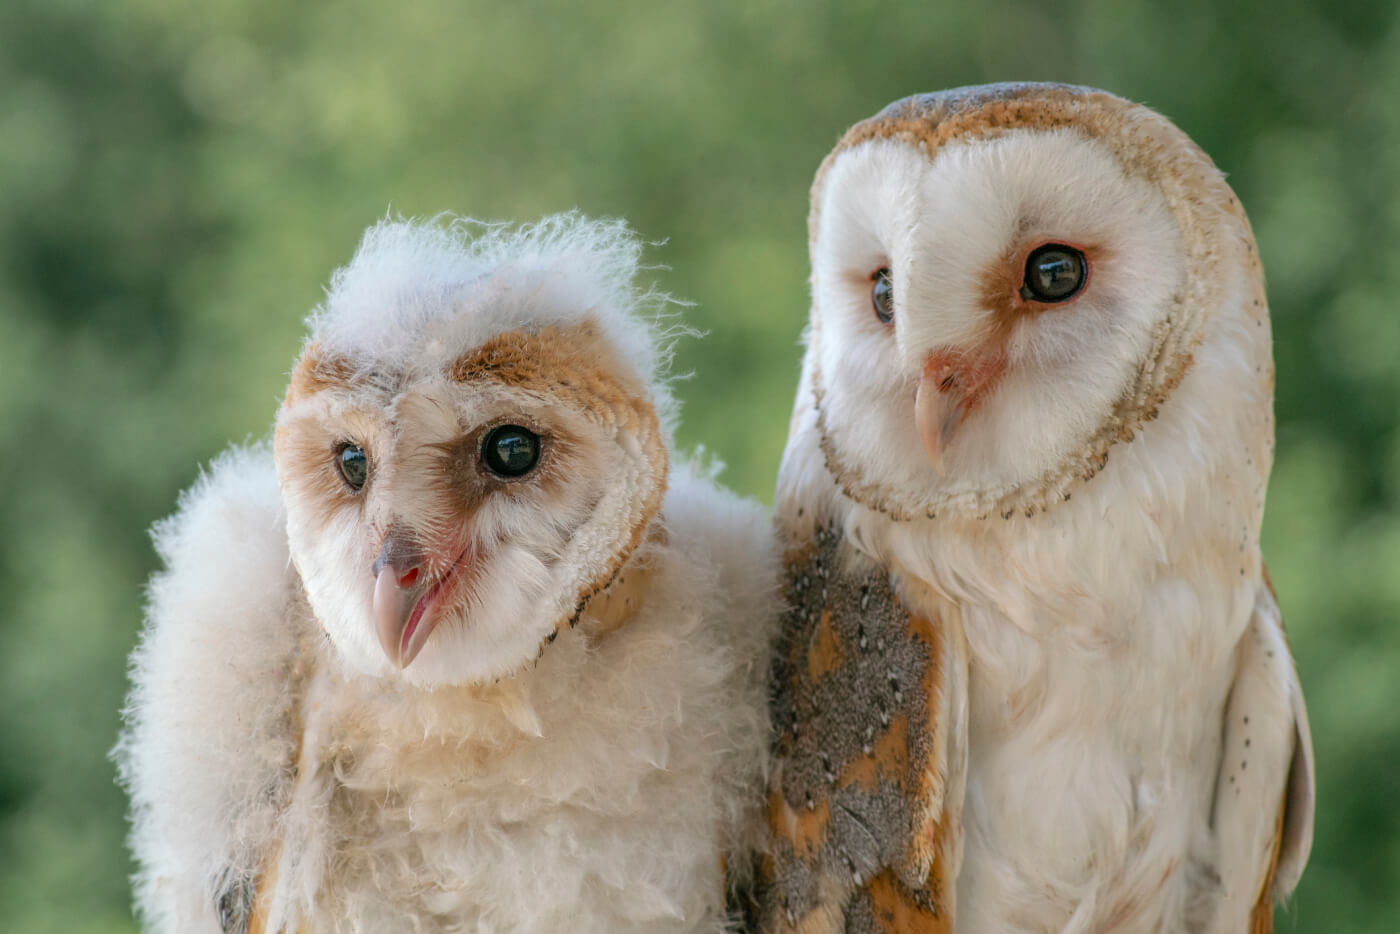 10 Reasons to Love Barn Owls (Not Experiment on Them) | PETA